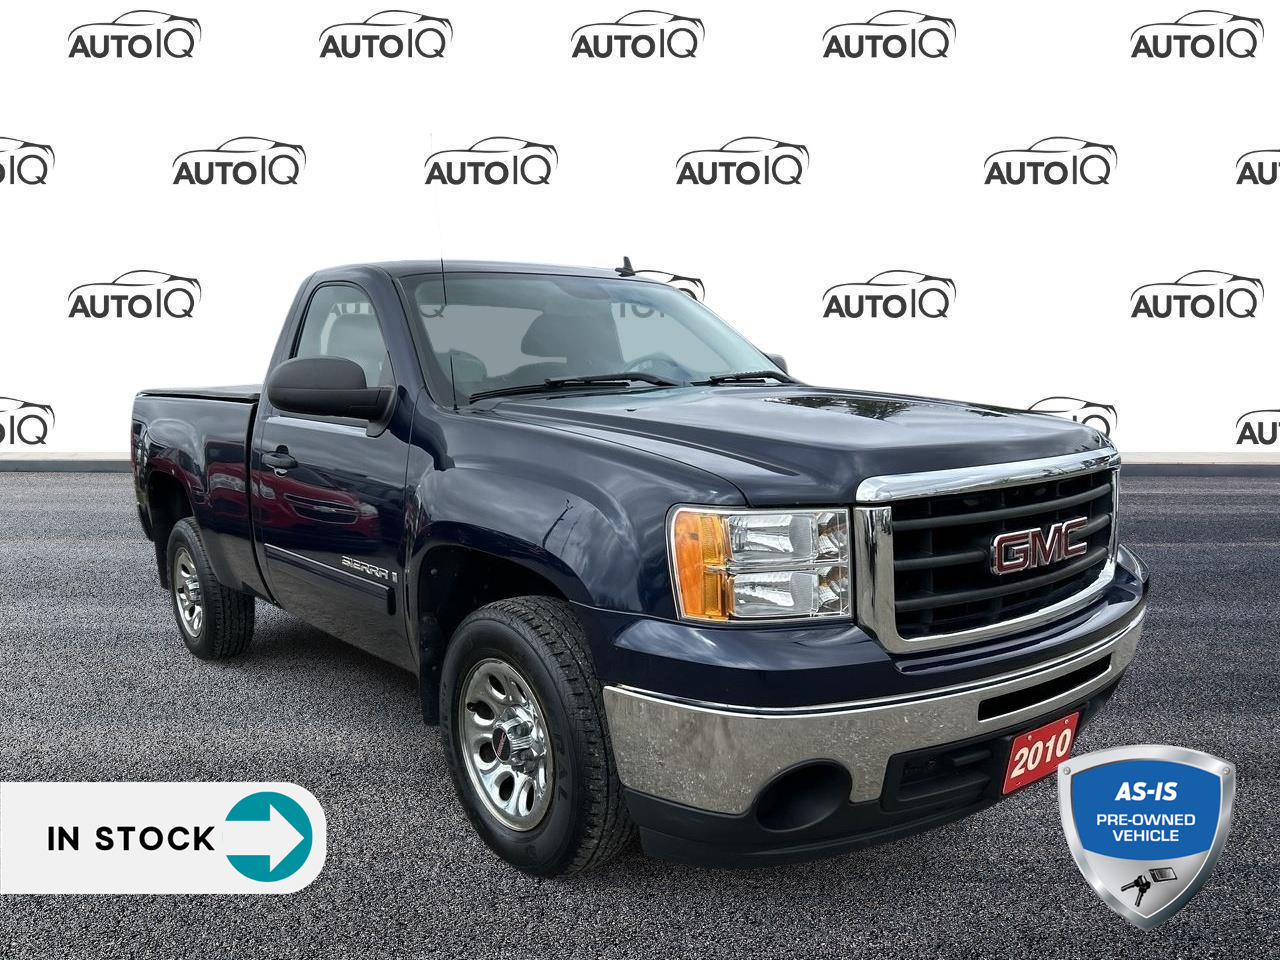 2010 GMC Sierra 1500 SLE AS TRADED - YOU CERTIFY YOU SAVE